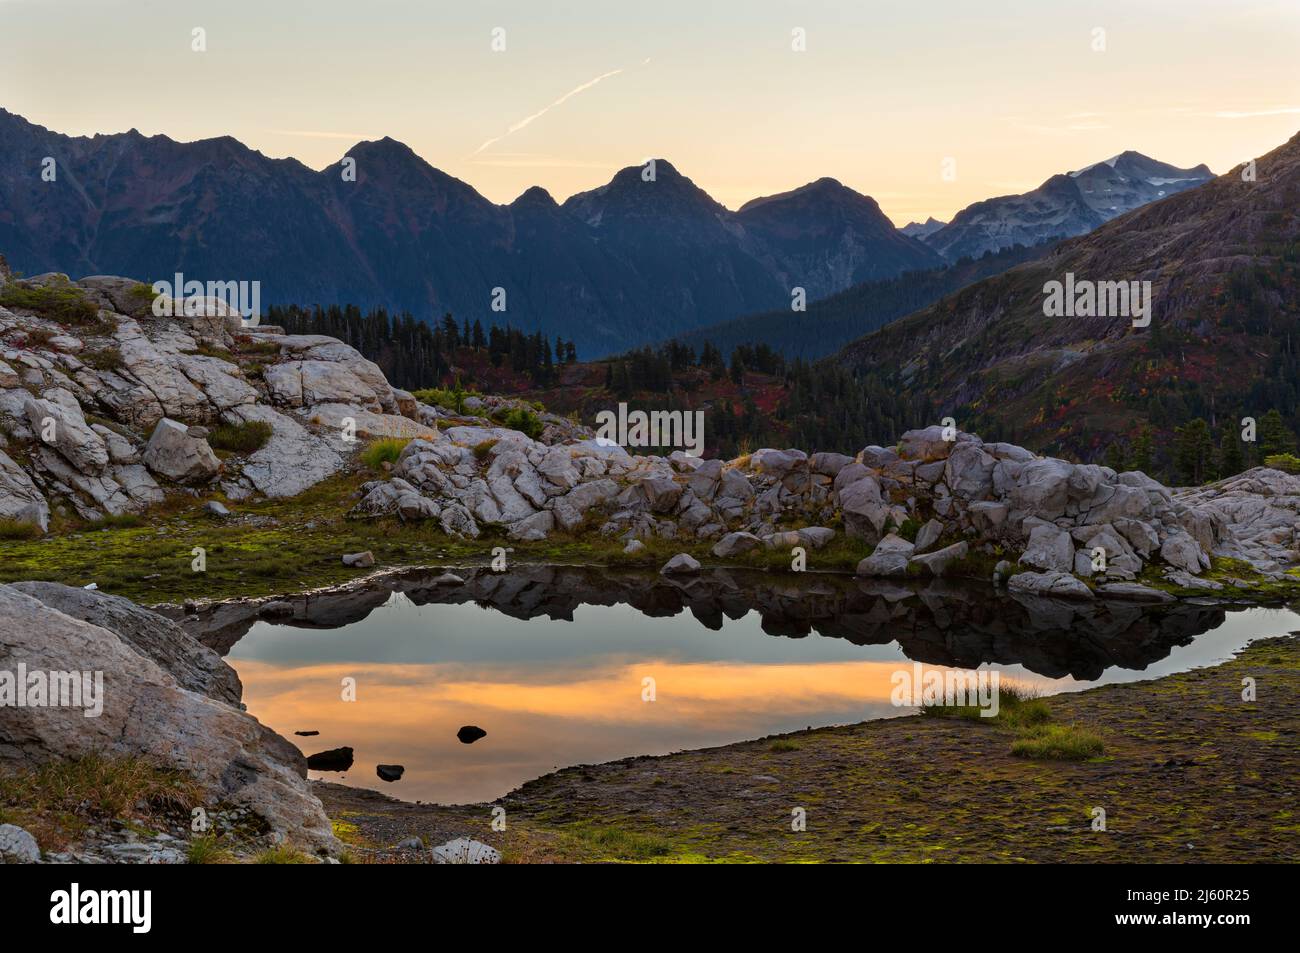 WA21471-00...WASHINGTON - View north from Artist Point shortly before sunrise in the Mount Baker-Snoqualmie National Forest. Stock Photo